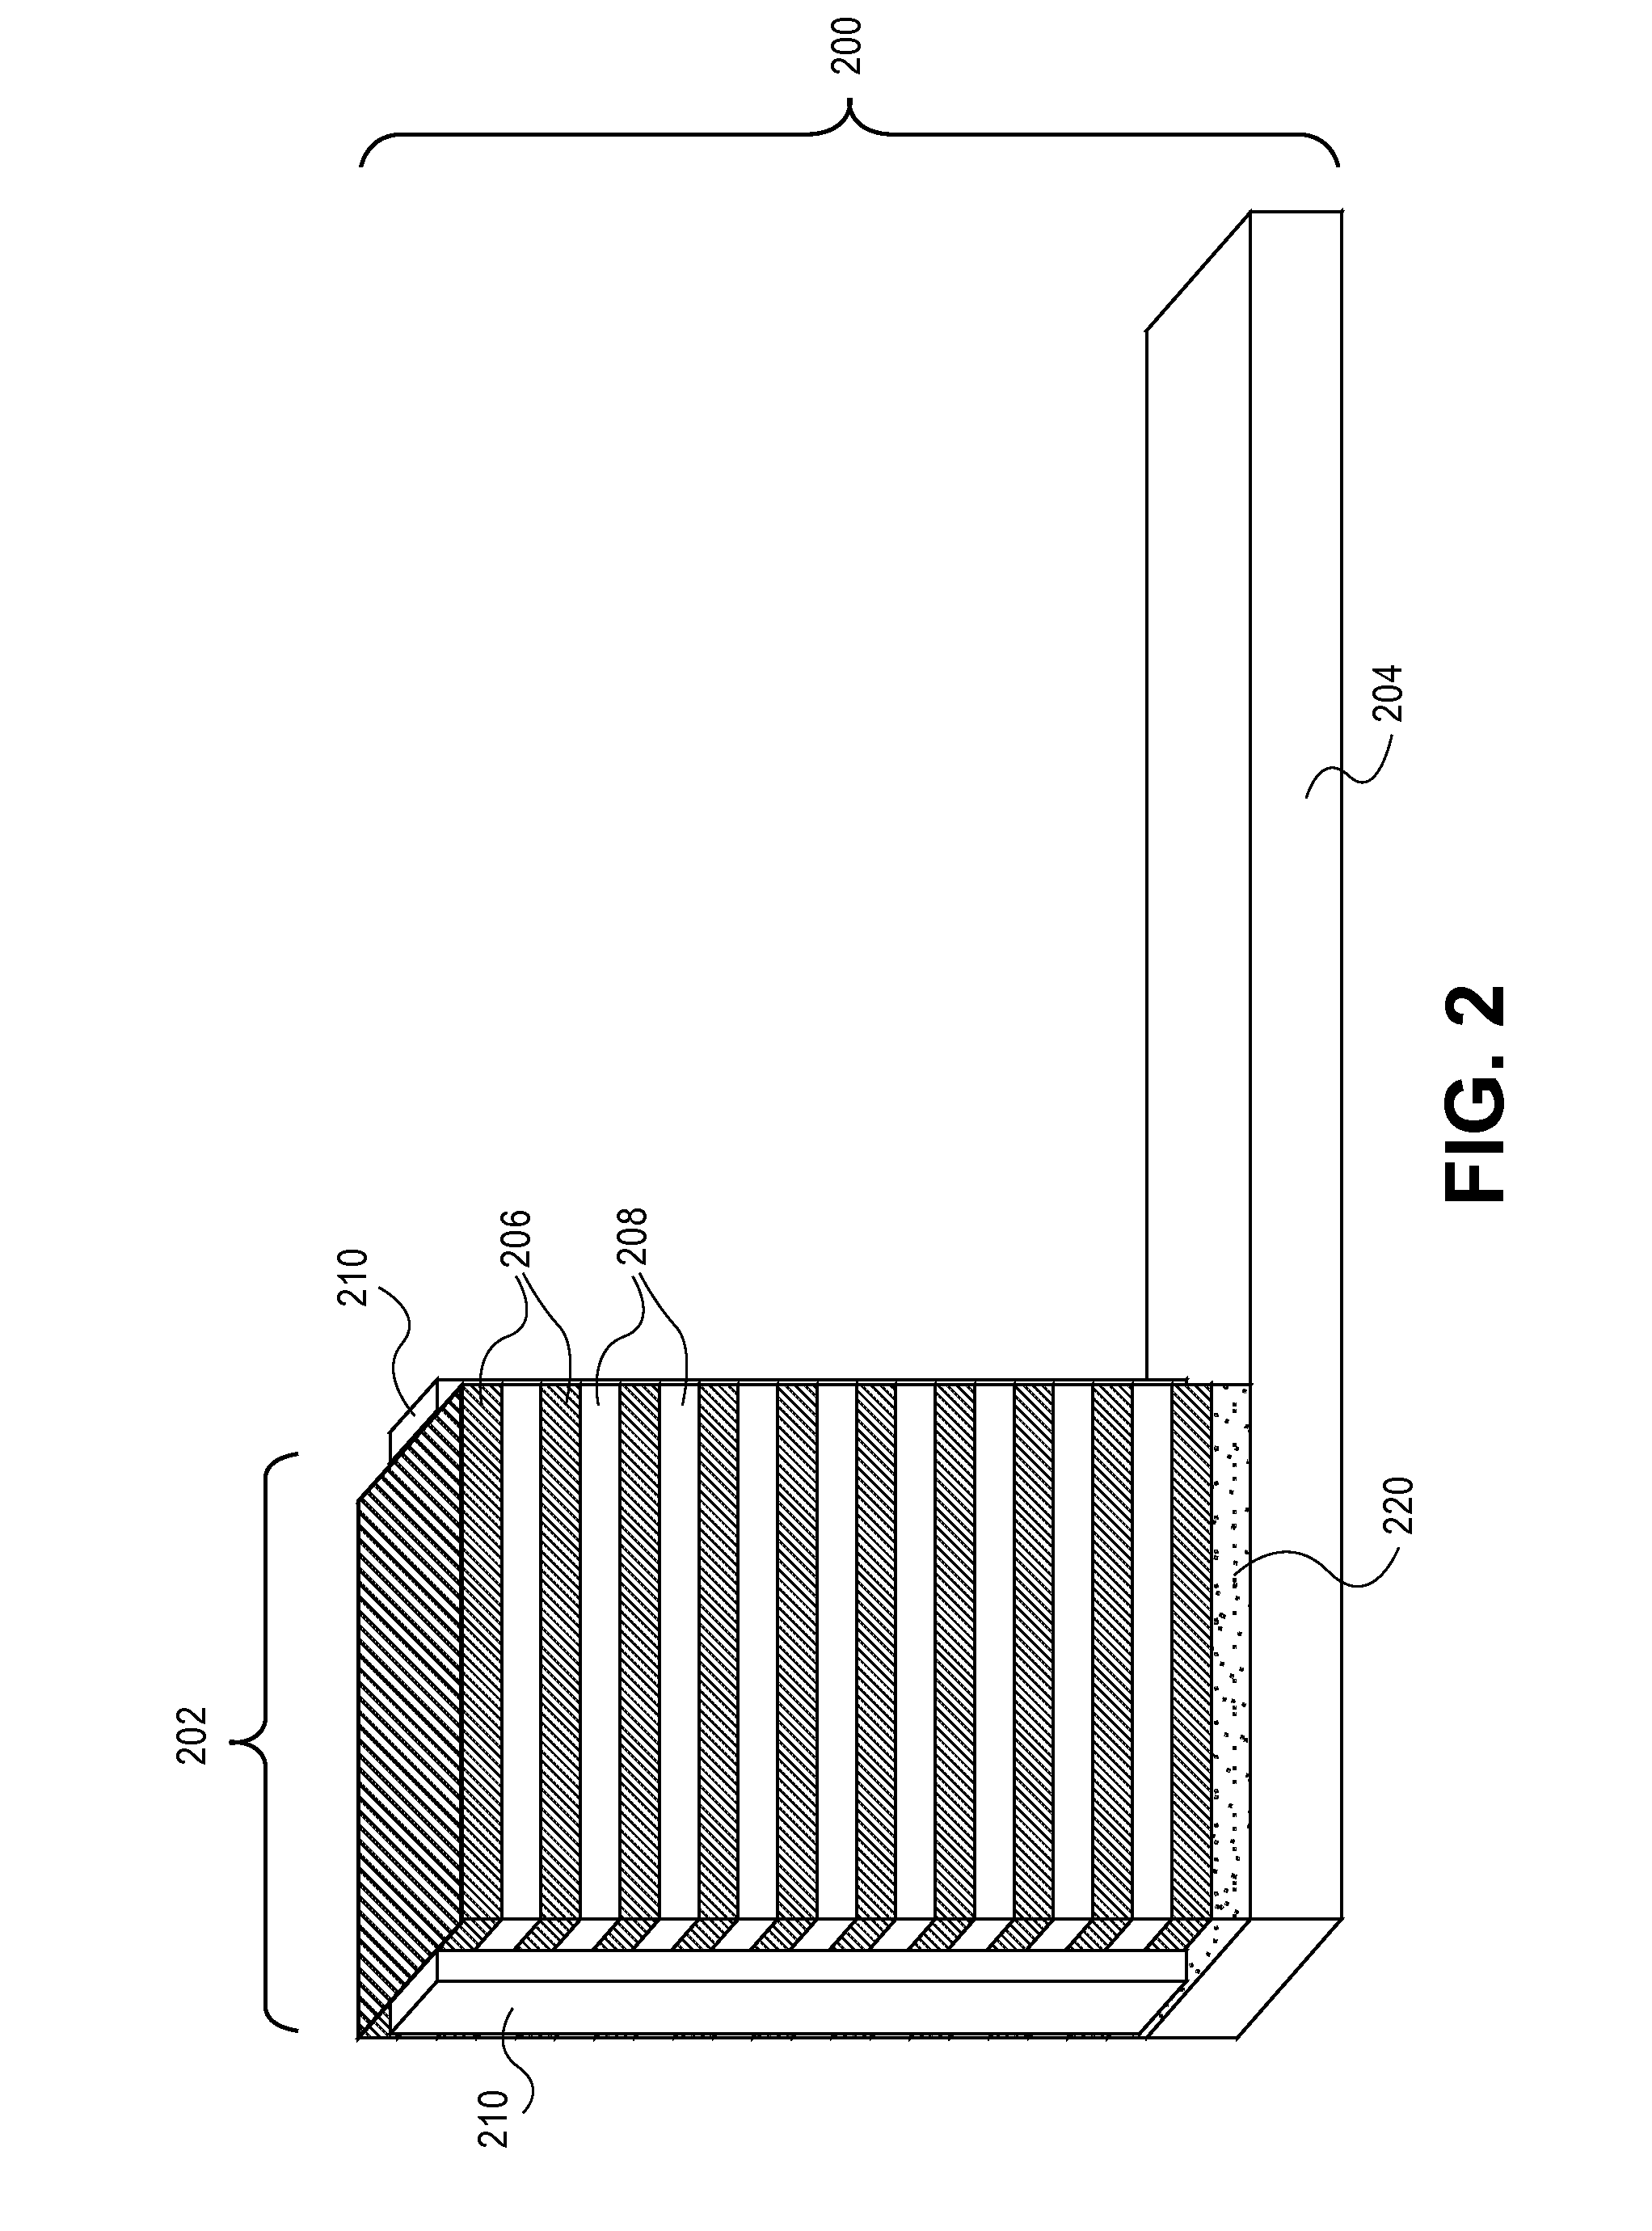 Multi-layer piezoelectric actuators with conductive polymer electrodes